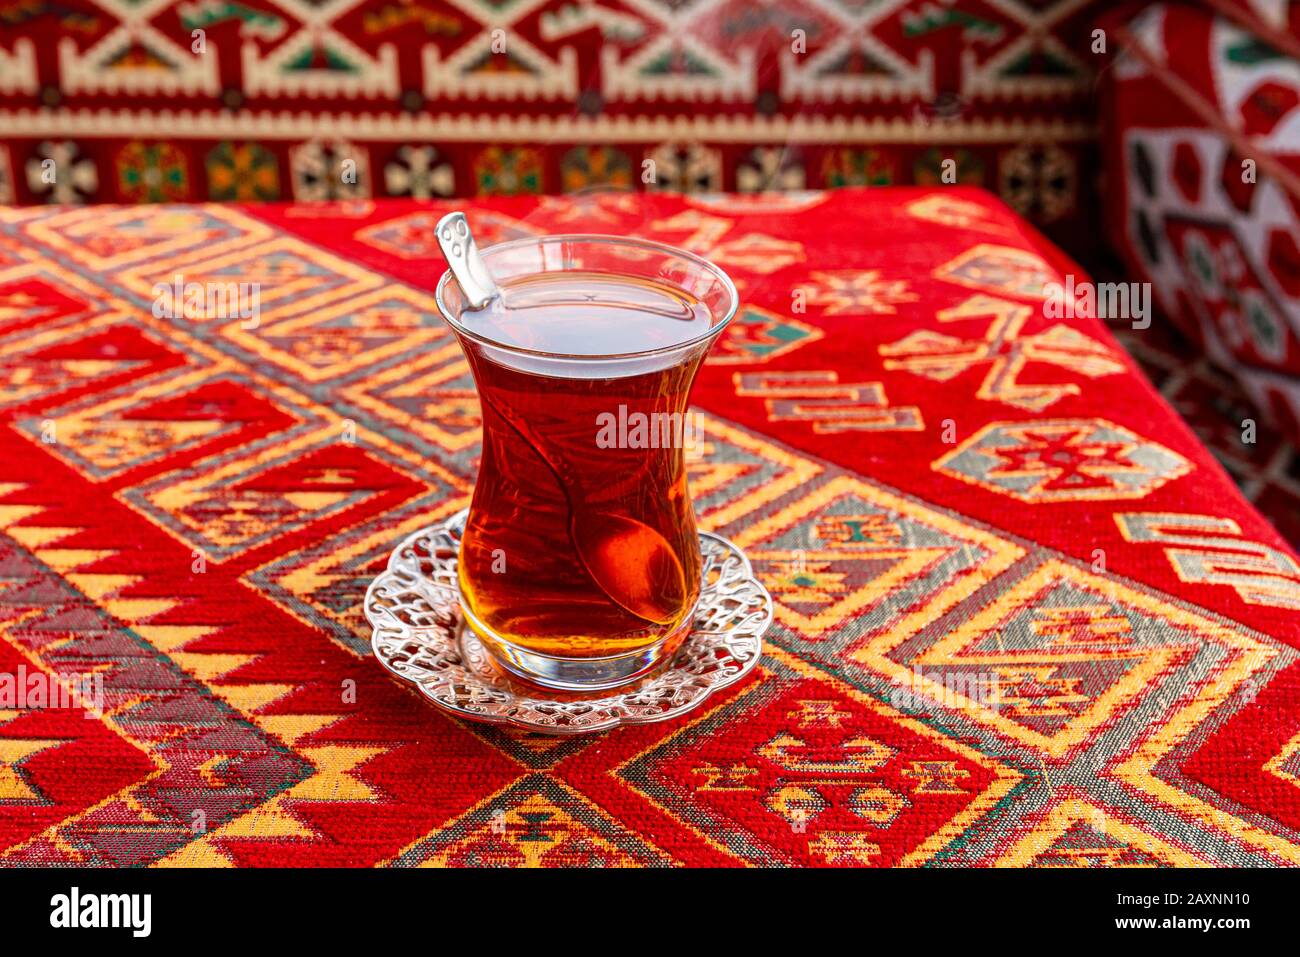 Hot Turkish Tea Cup on a Table with traditional Turkish Tablecloth Stock Photo